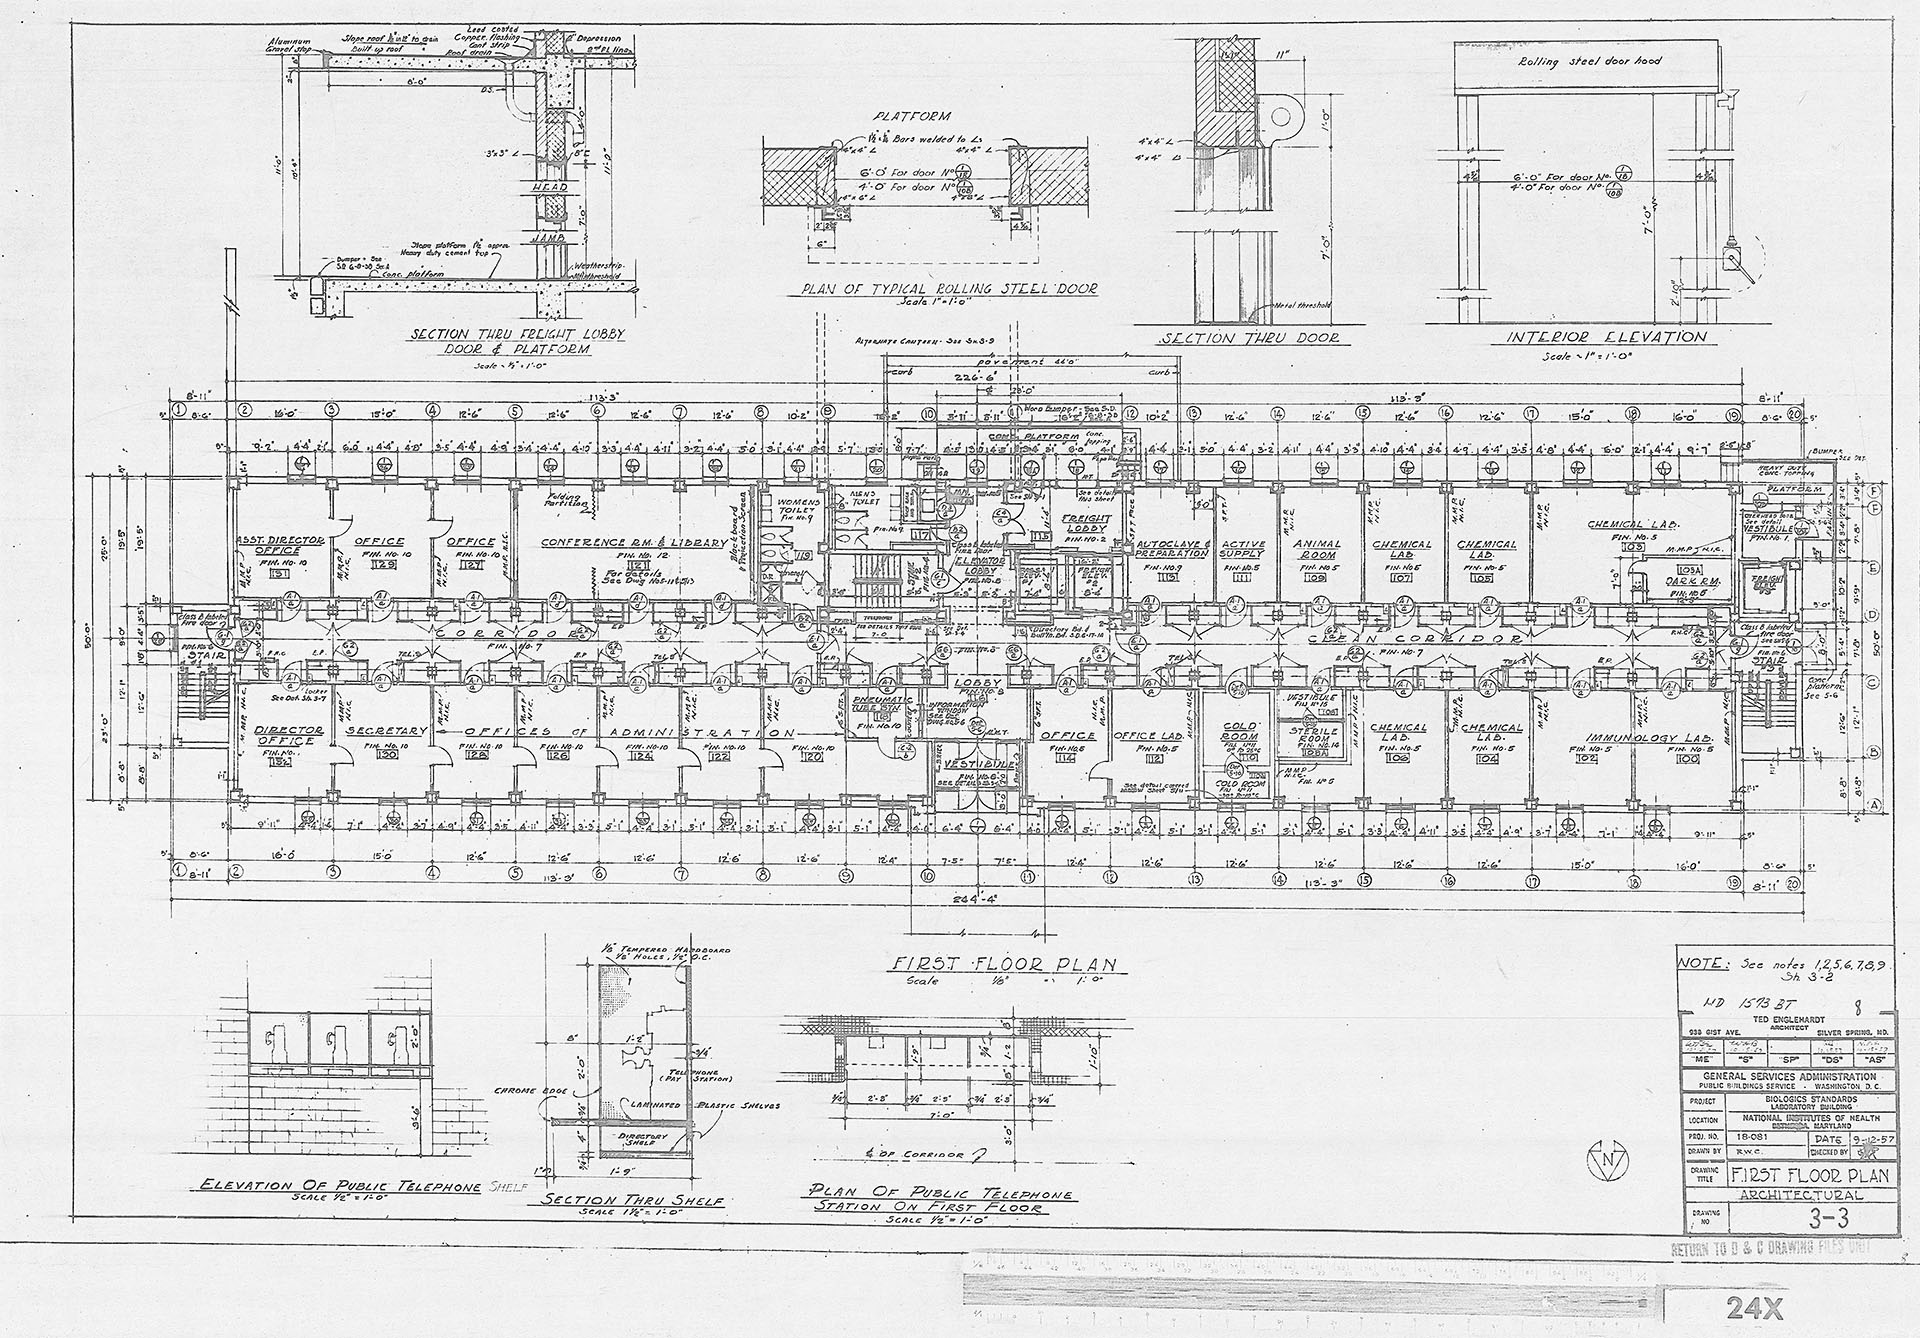 First floor plan of Building 29, showing administrative office and laboratory spaces